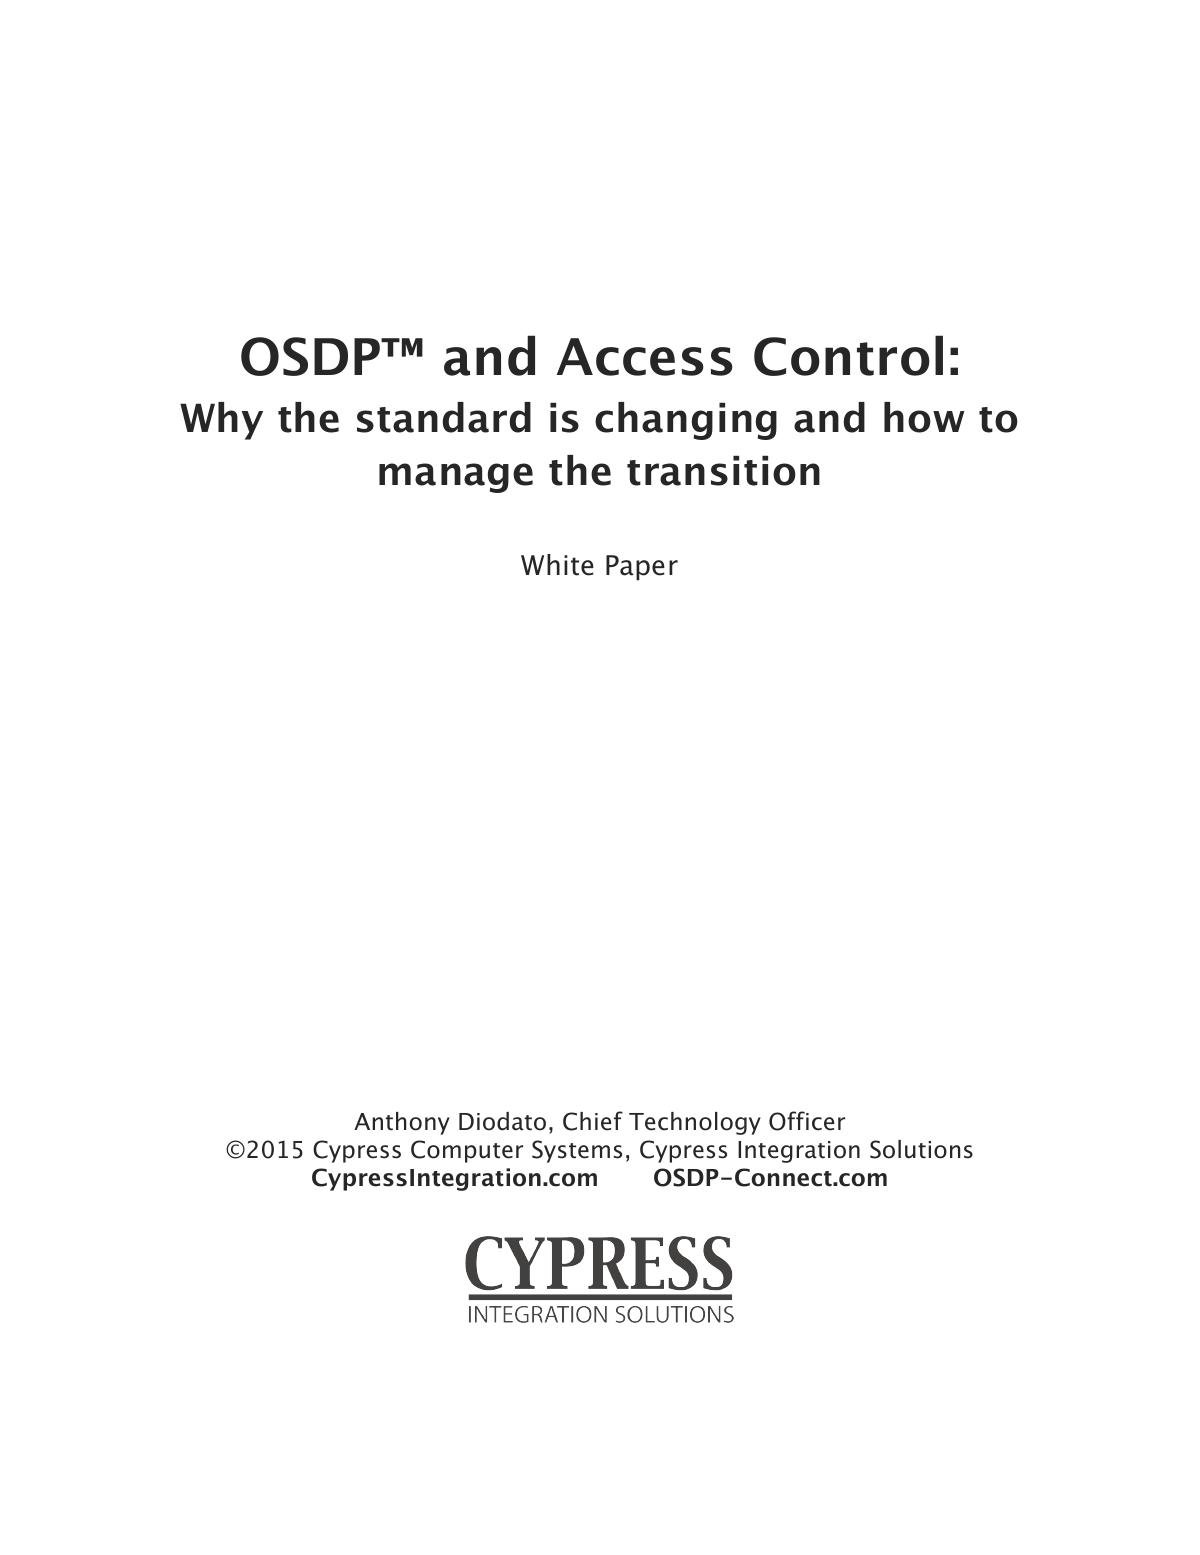 OSDP™ and Access Control: Why the Wiegand standard is changing and how to manage the transition